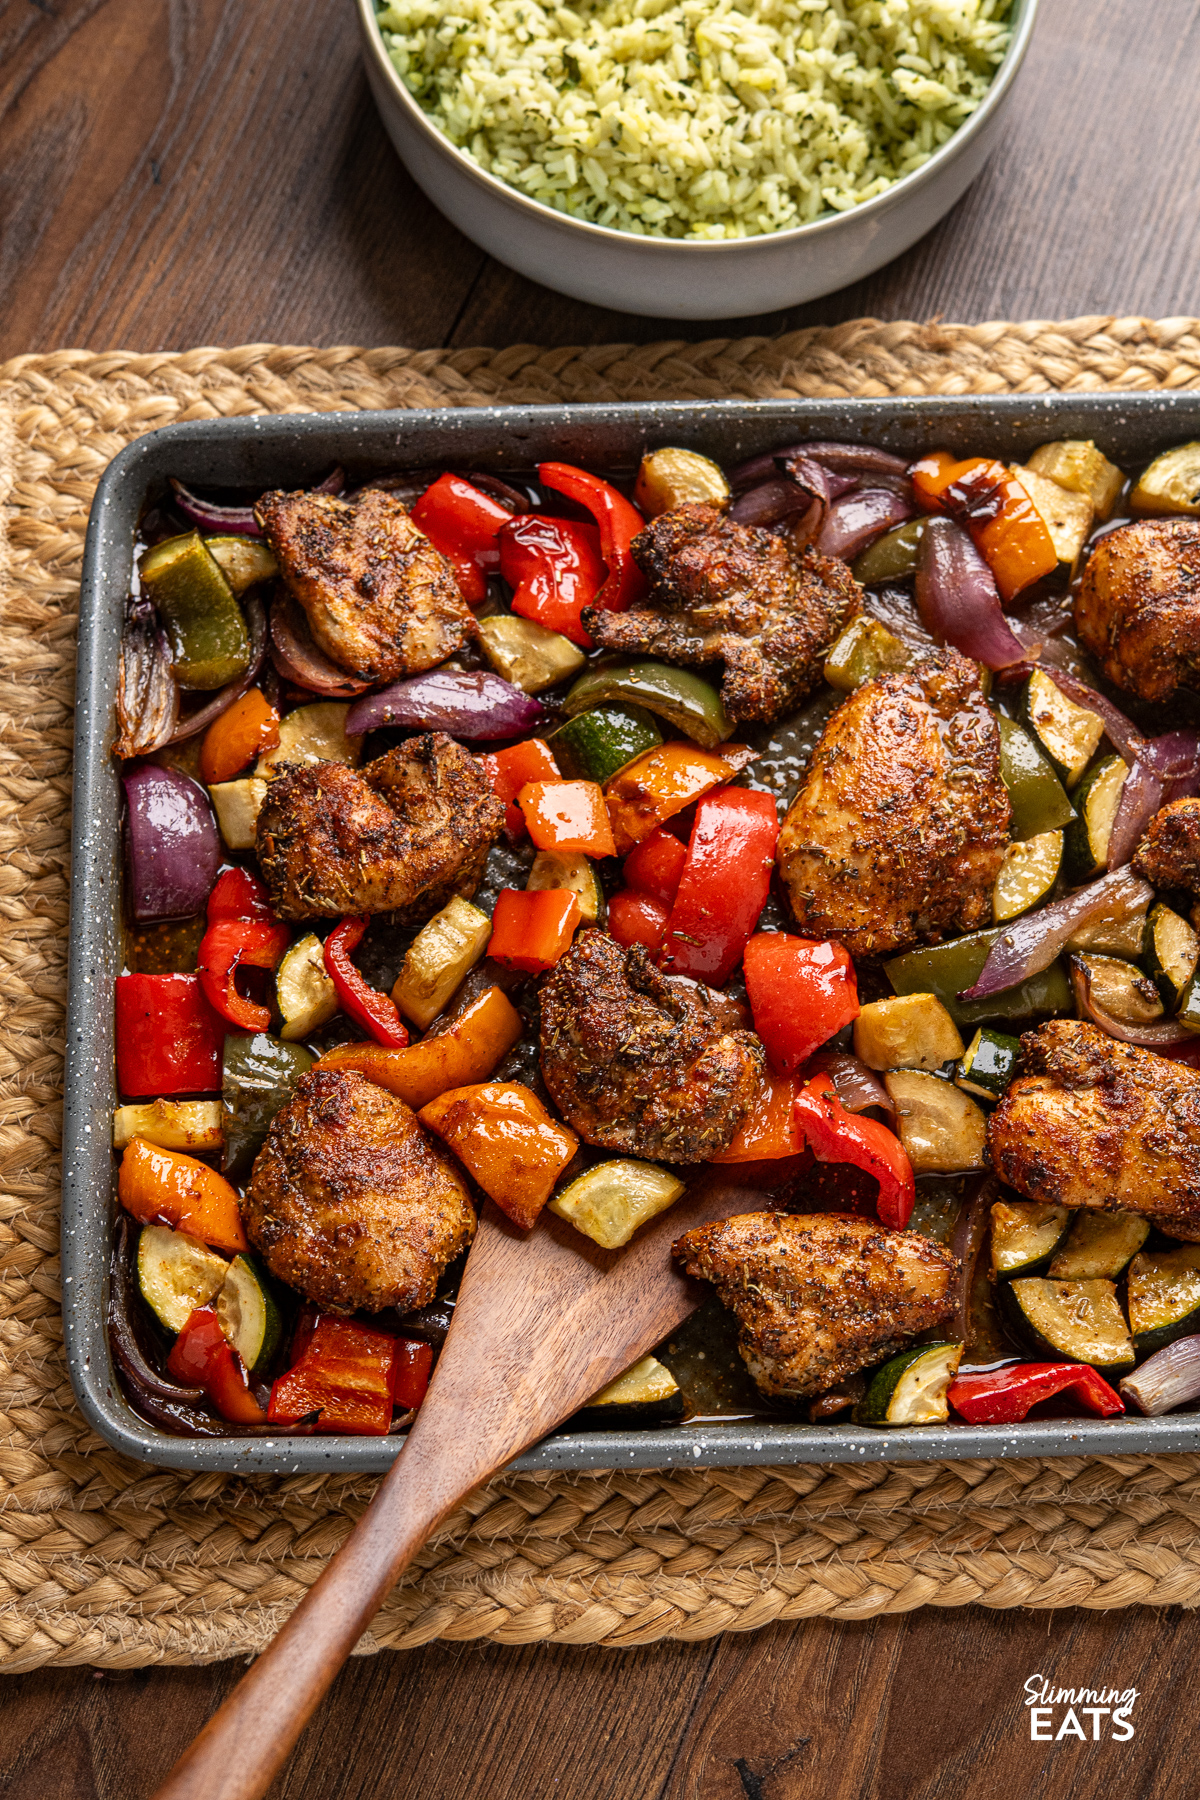 Black pepper chicken with balsamic roasted vegetables arranged on a baking tray, accompanied by a bowl of herby seasoned rice in the background